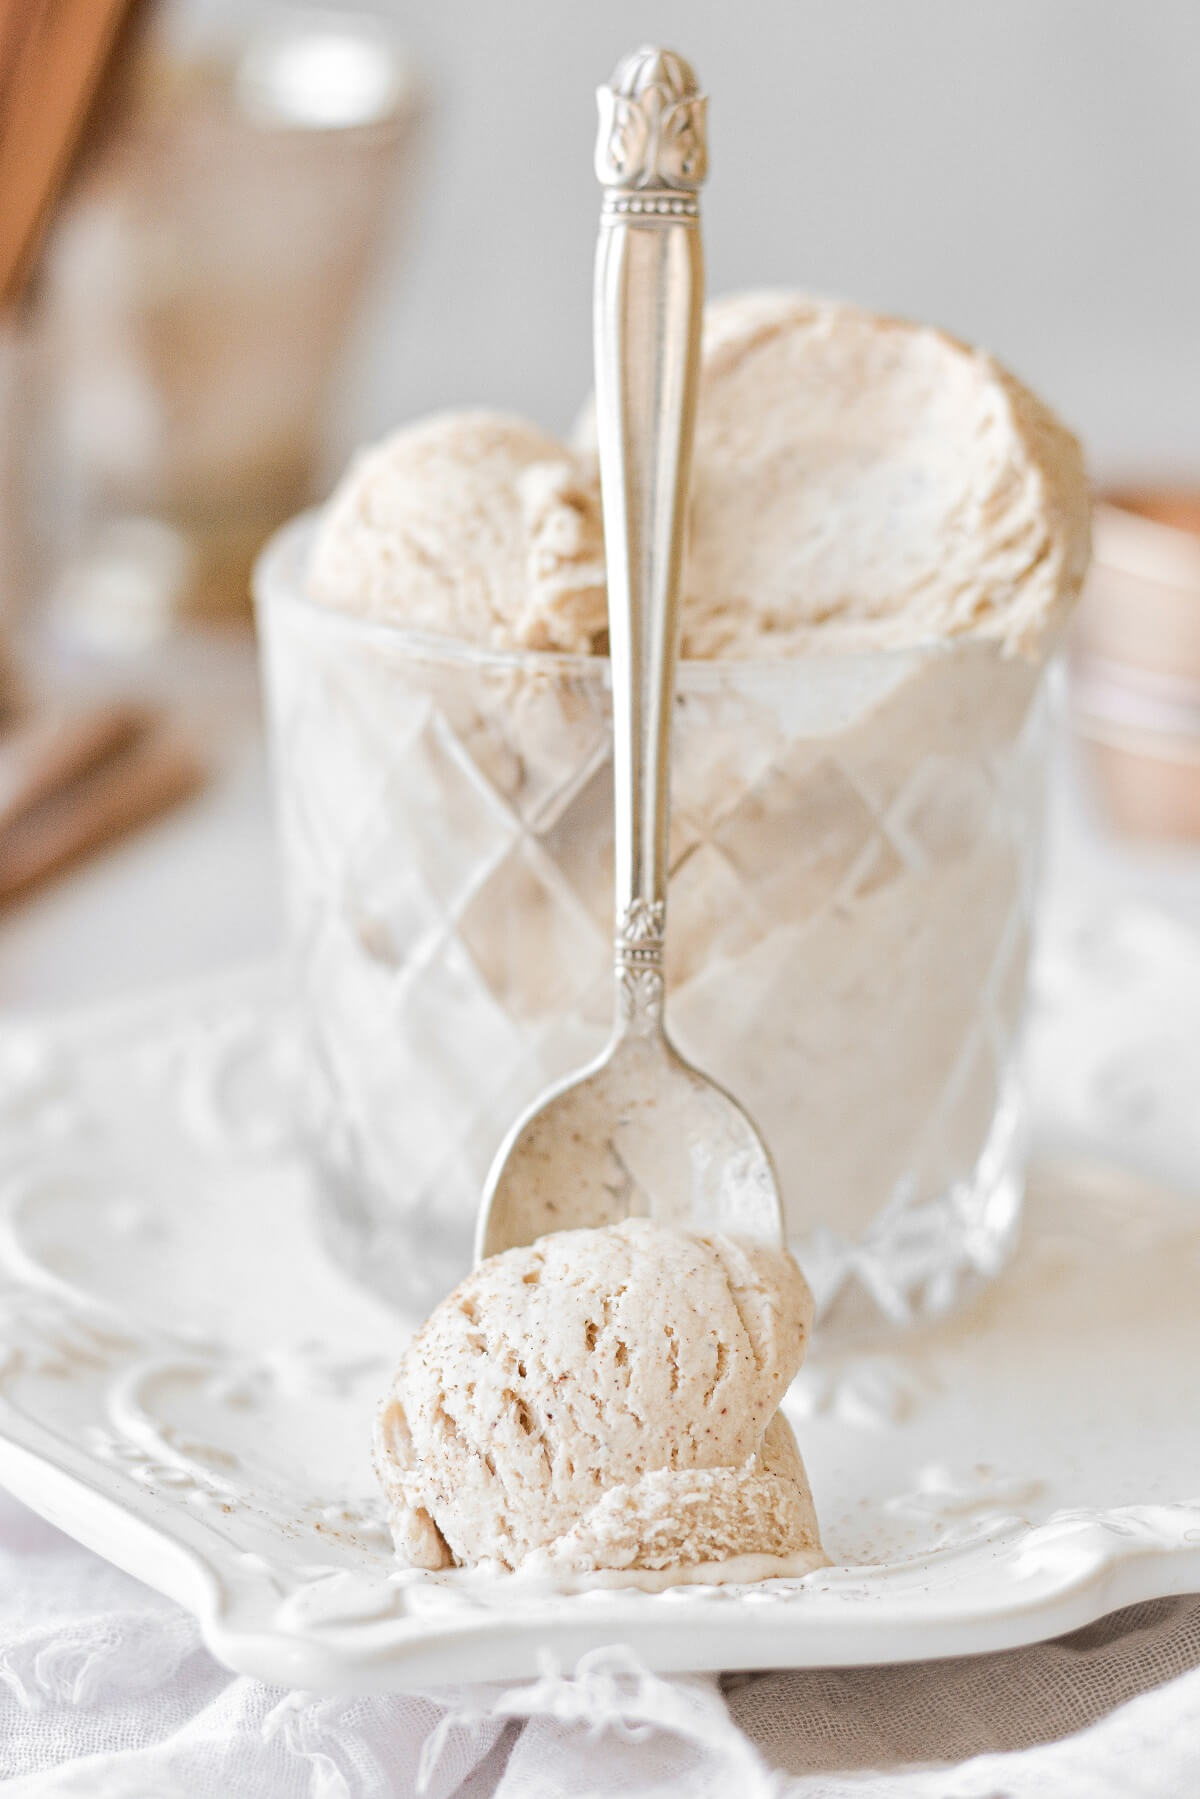 A spoonful of cinnamon ice cream, leaning against a glass.